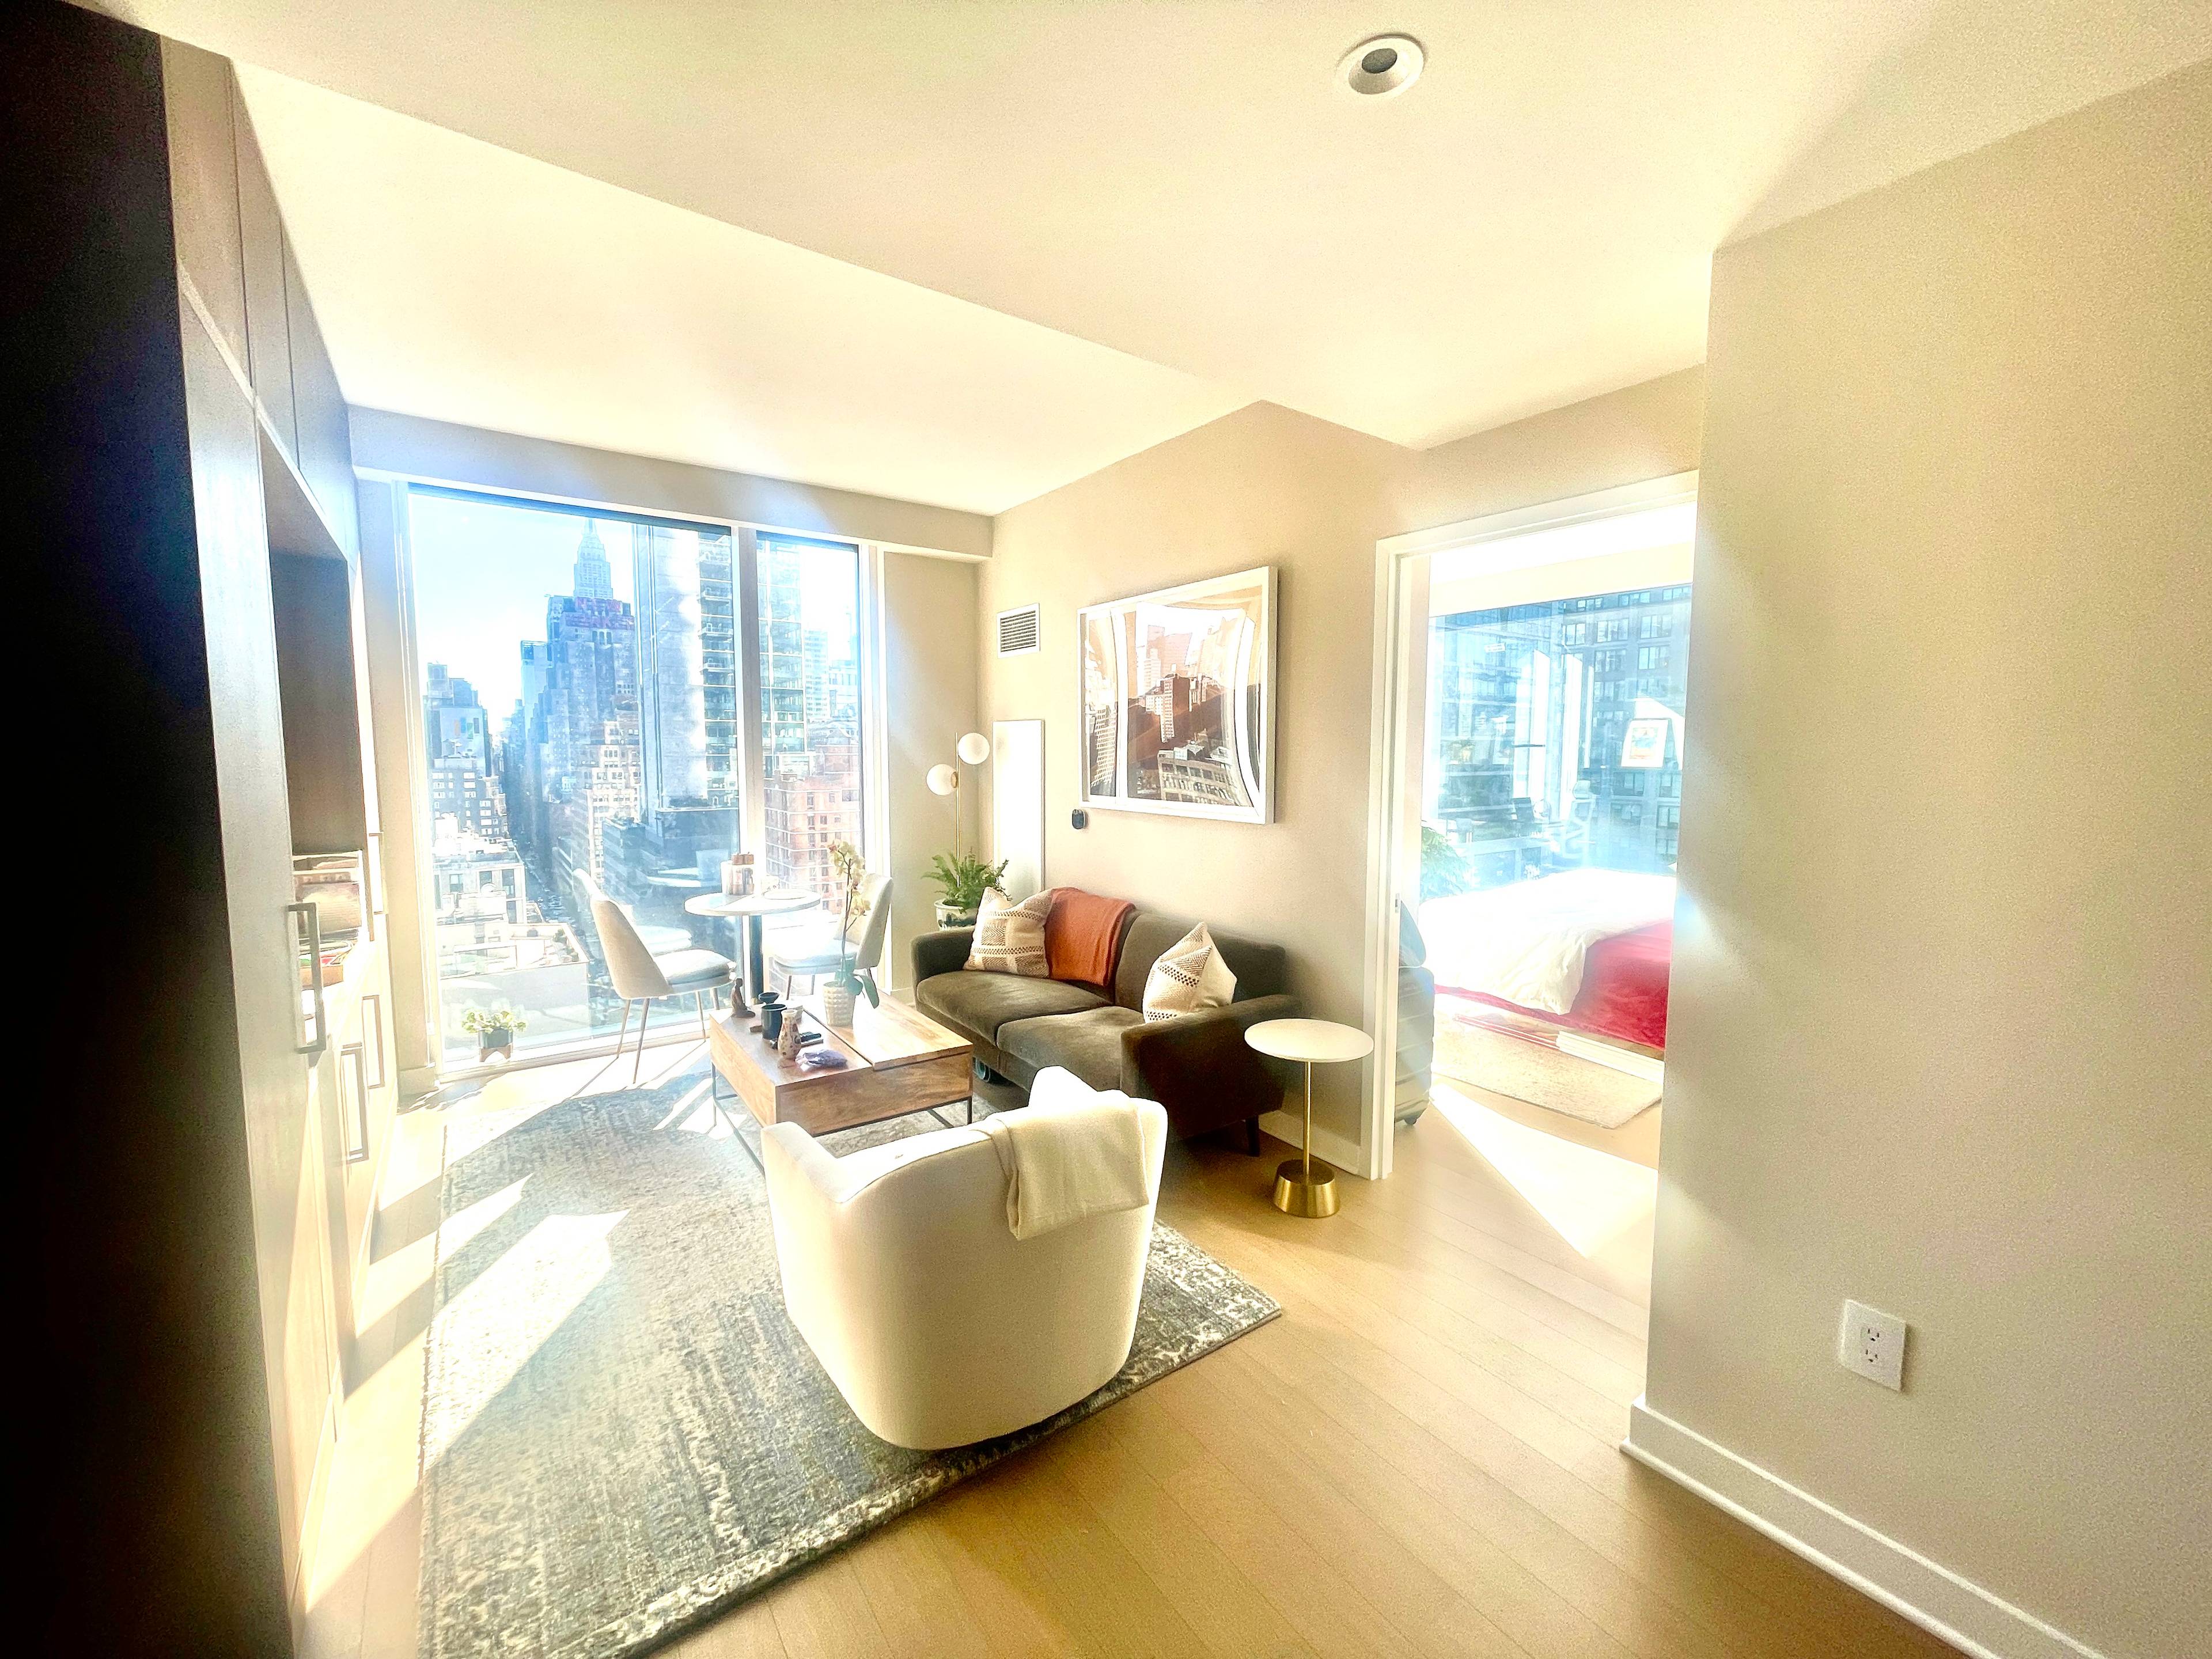 Luxury Furnished Apt in Hudson Yards Available June-August!